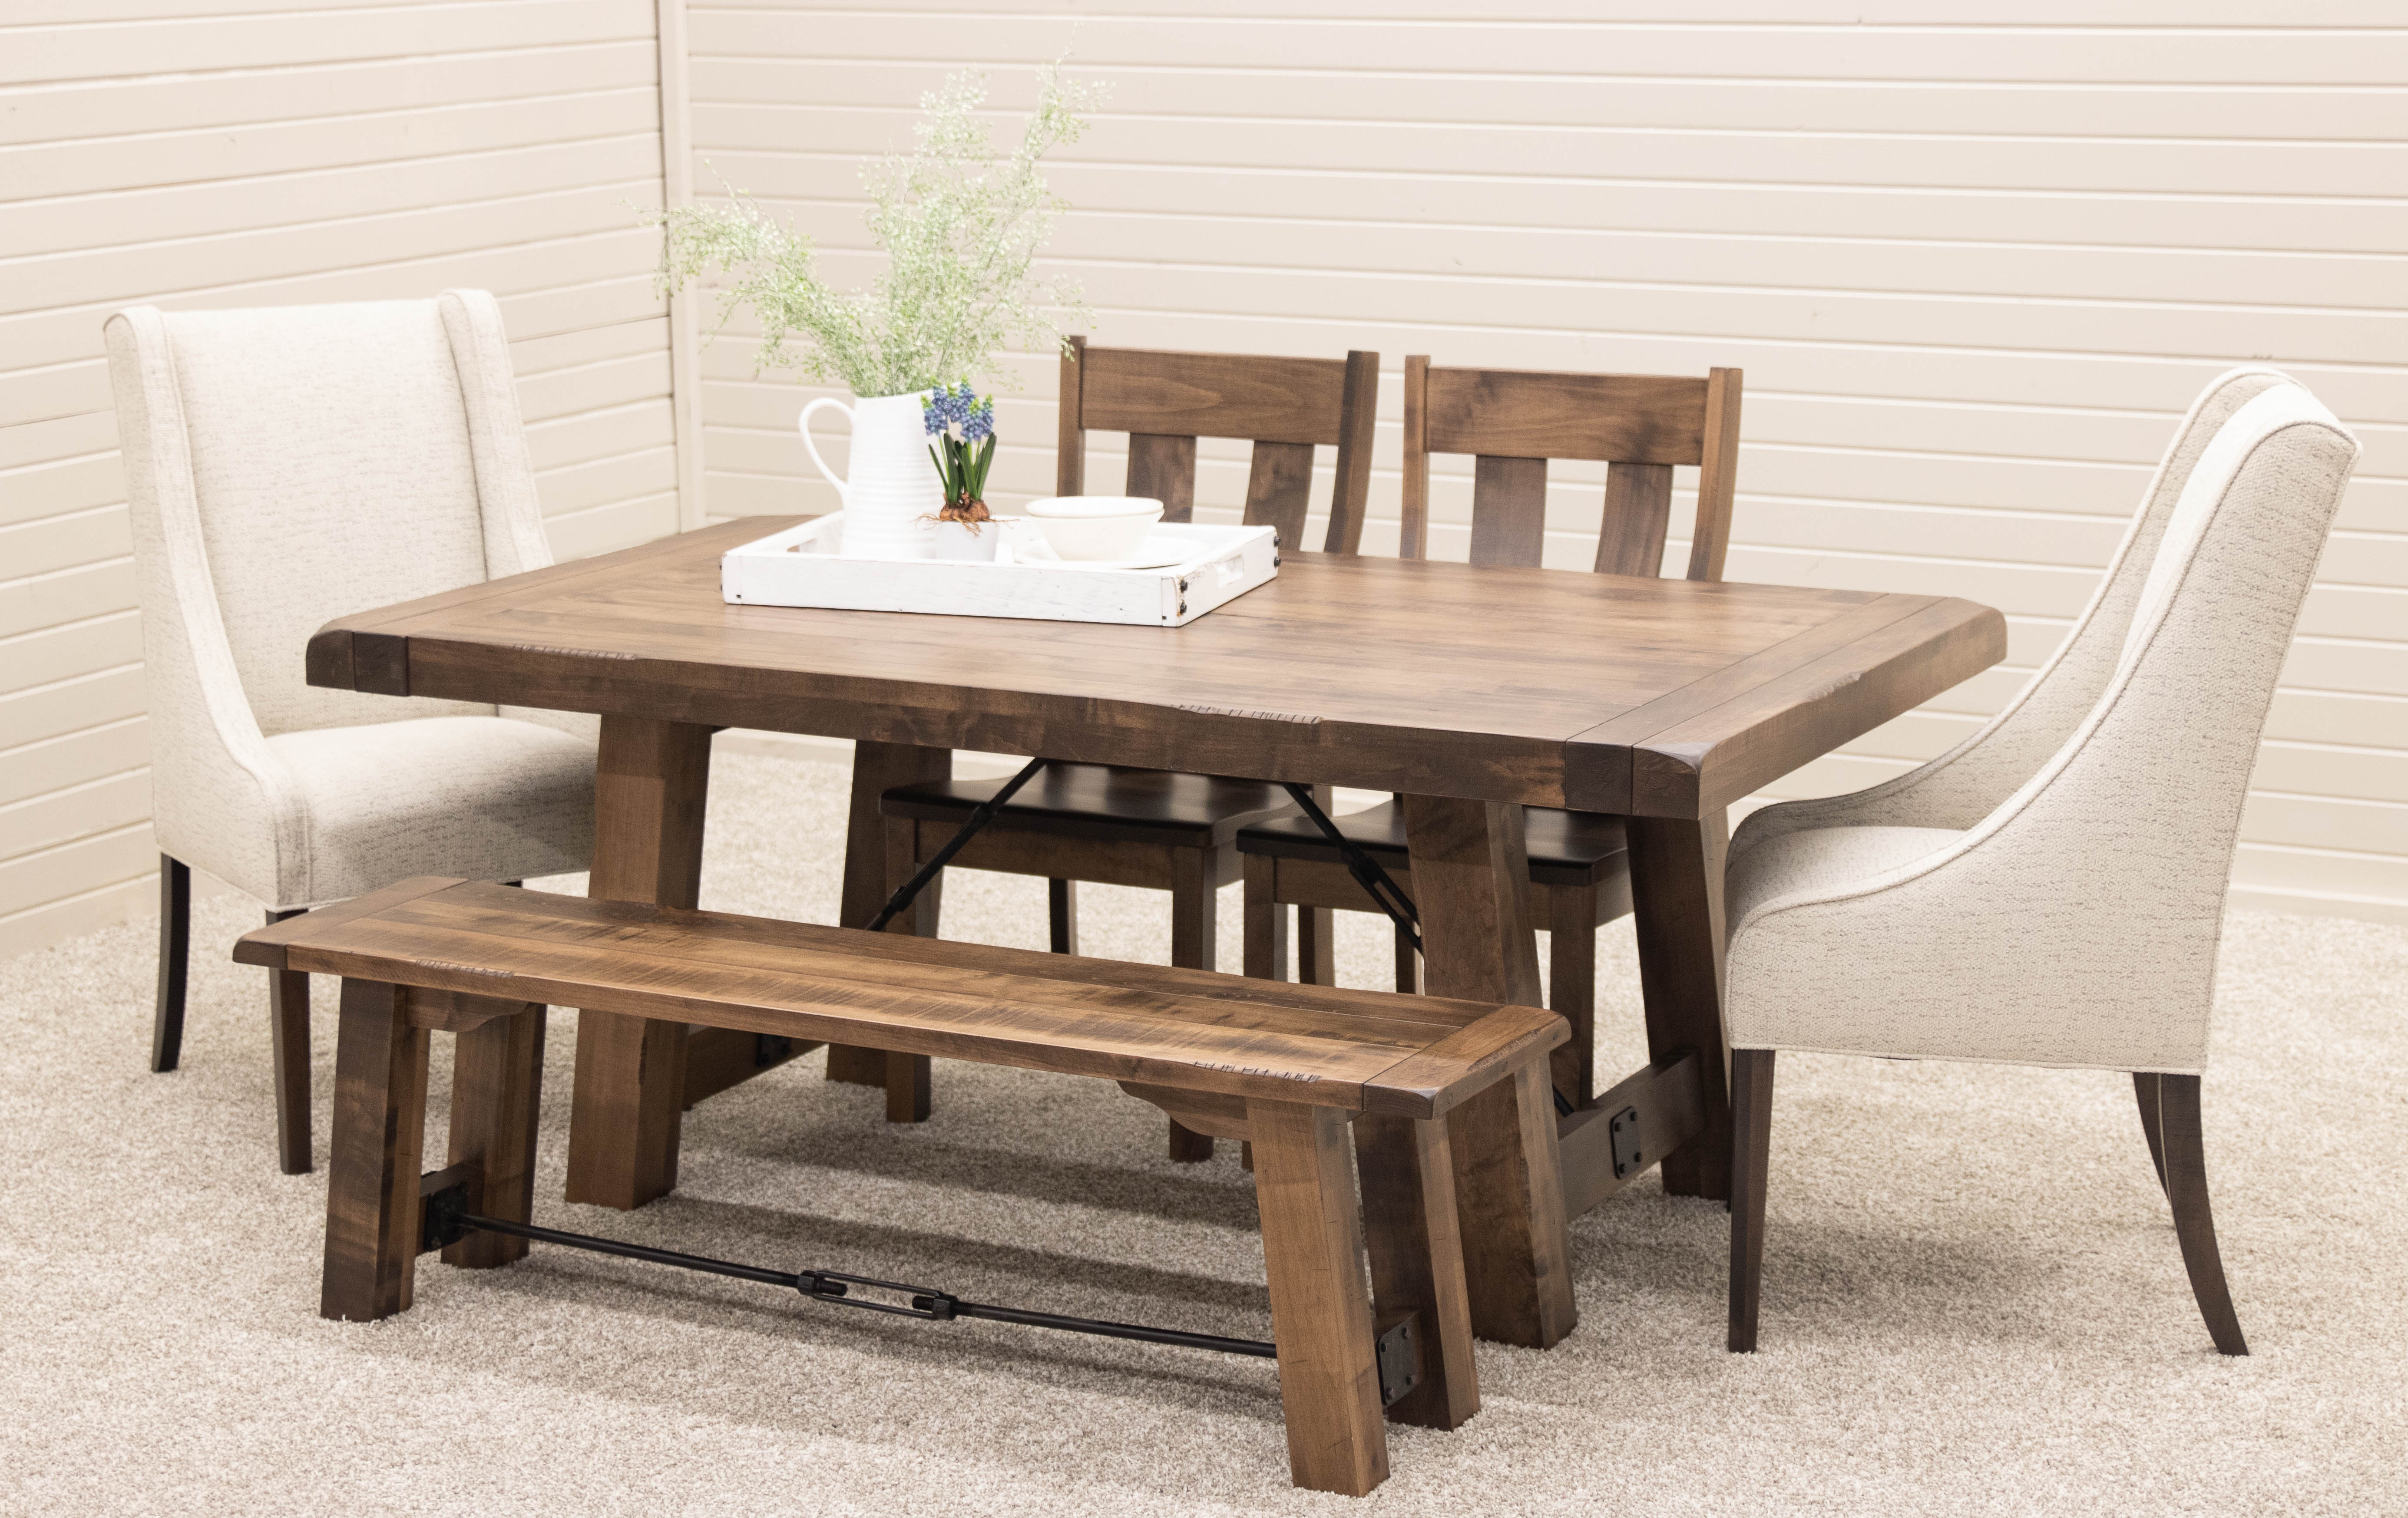 Settler's Trestle Dining Set with Wooden & Fabric Chairs